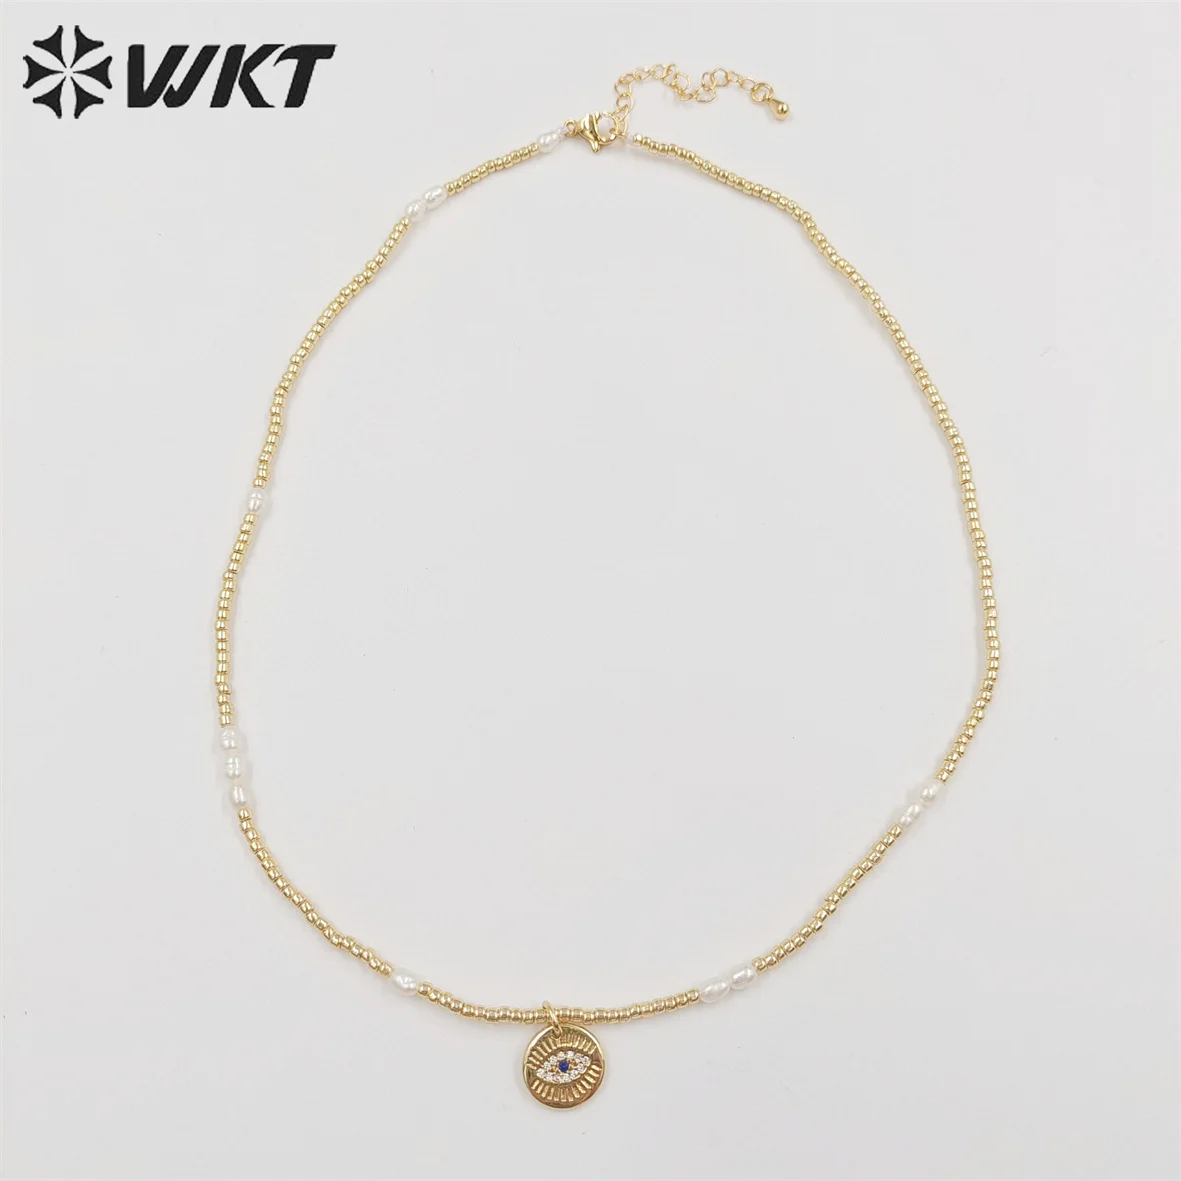 

WT-JN179 WKT New Design Elegant Tiny Gold Beads Adjustable Necklace Lady Small Charm Evil Eye Pearl For Friends Present